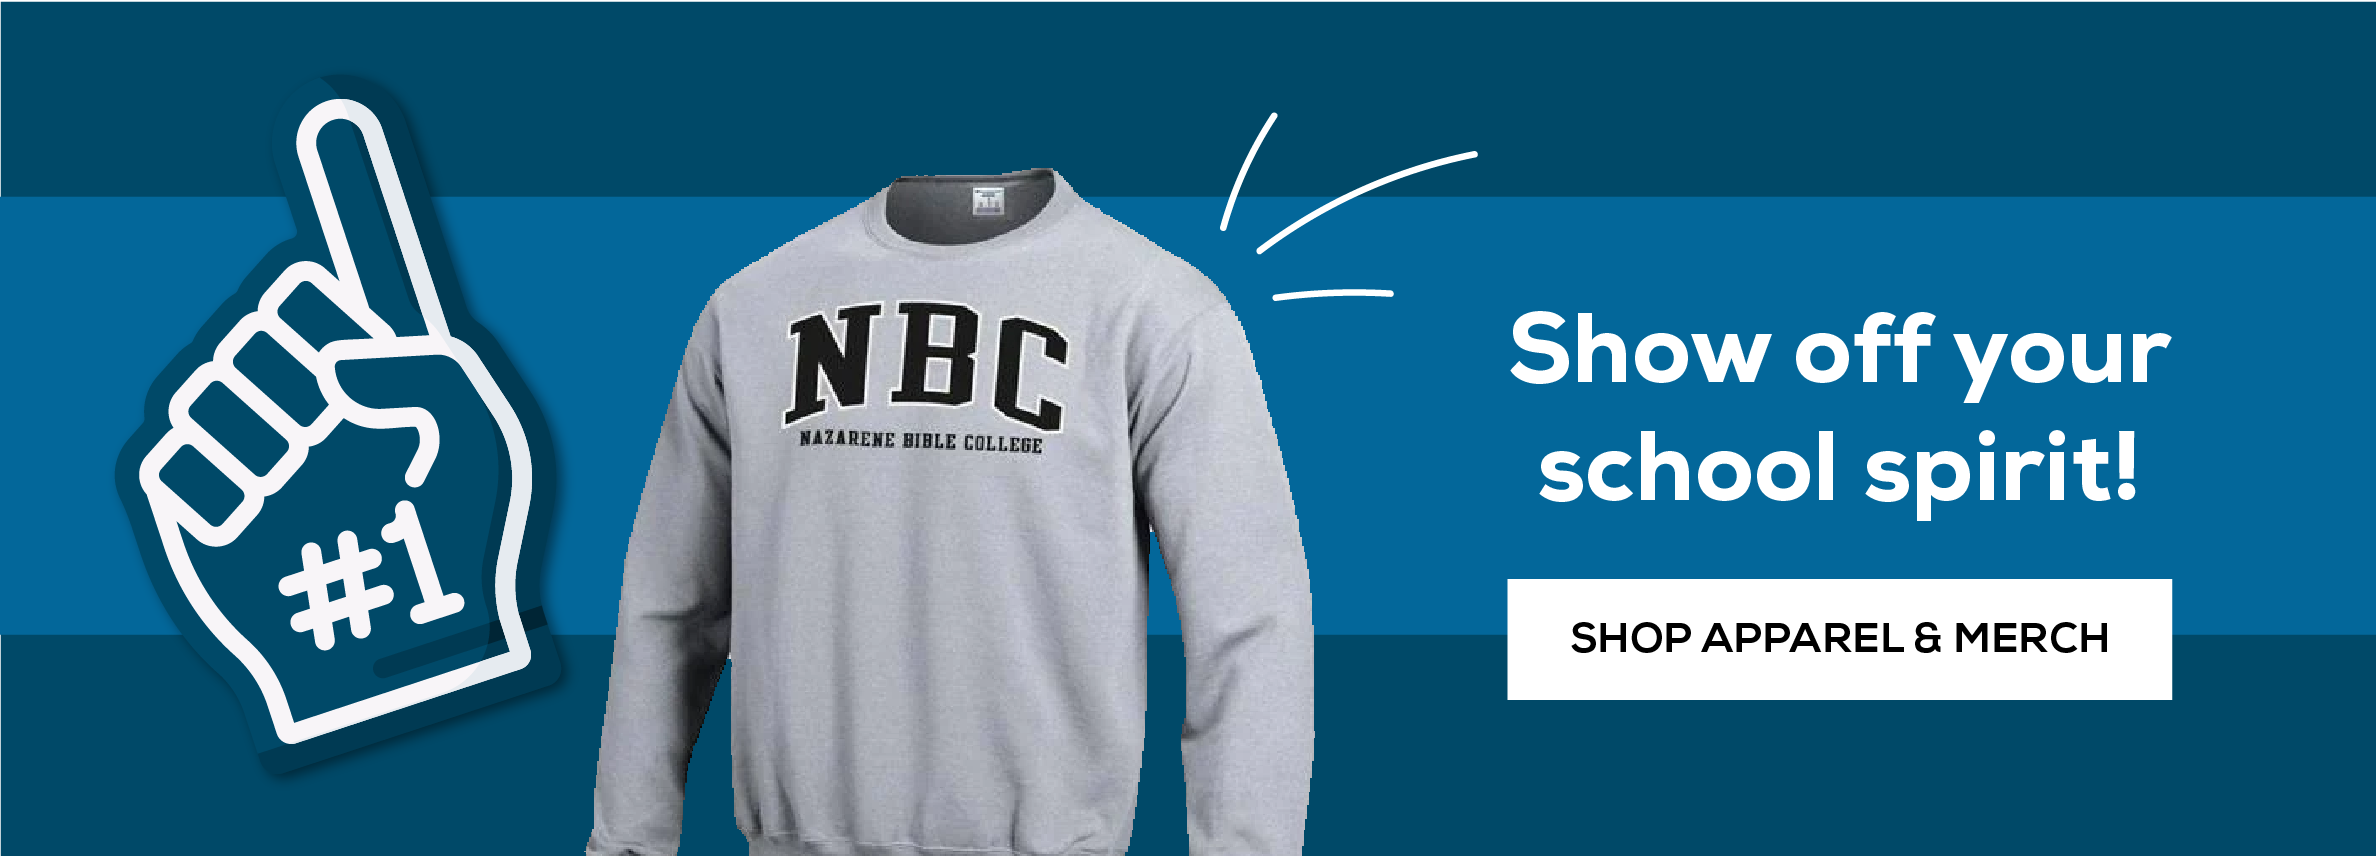 Show off your school sprit! Shop apparel and merch